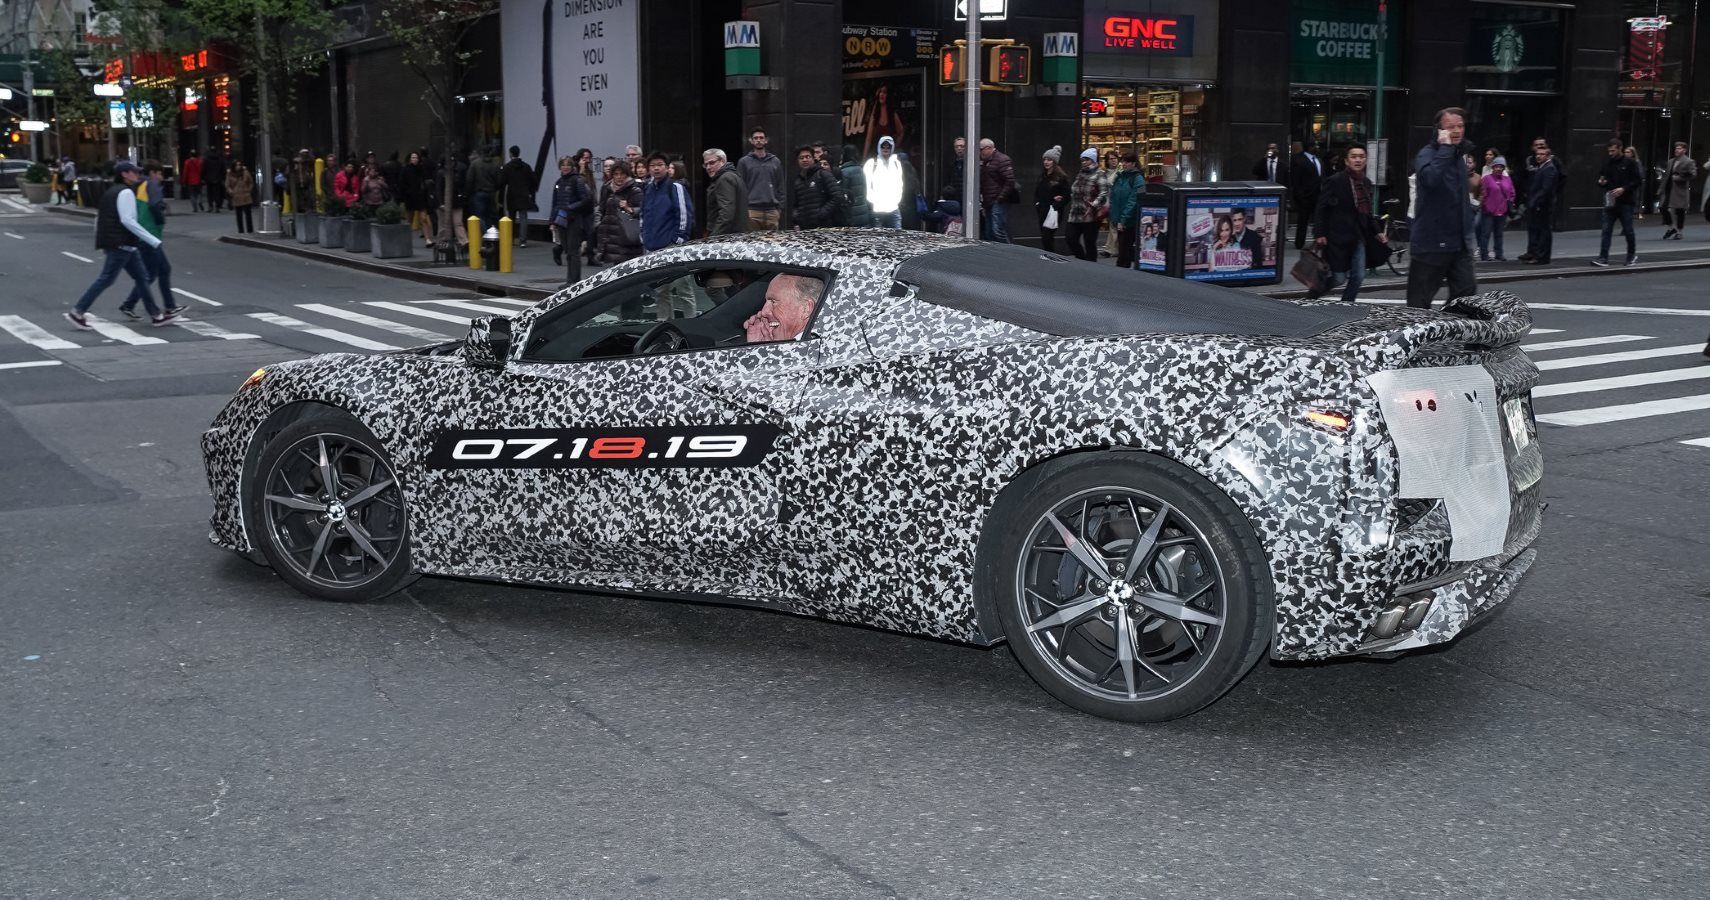 Chevrolet announces the next generation Corvette will debut 07.18.19. A camouflaged next generation Corvette travels down 7th Avenue near Times Square Thursday, April 11, 2019 in New York, New York. (Photo by Todd Plitt for Chevrolet)